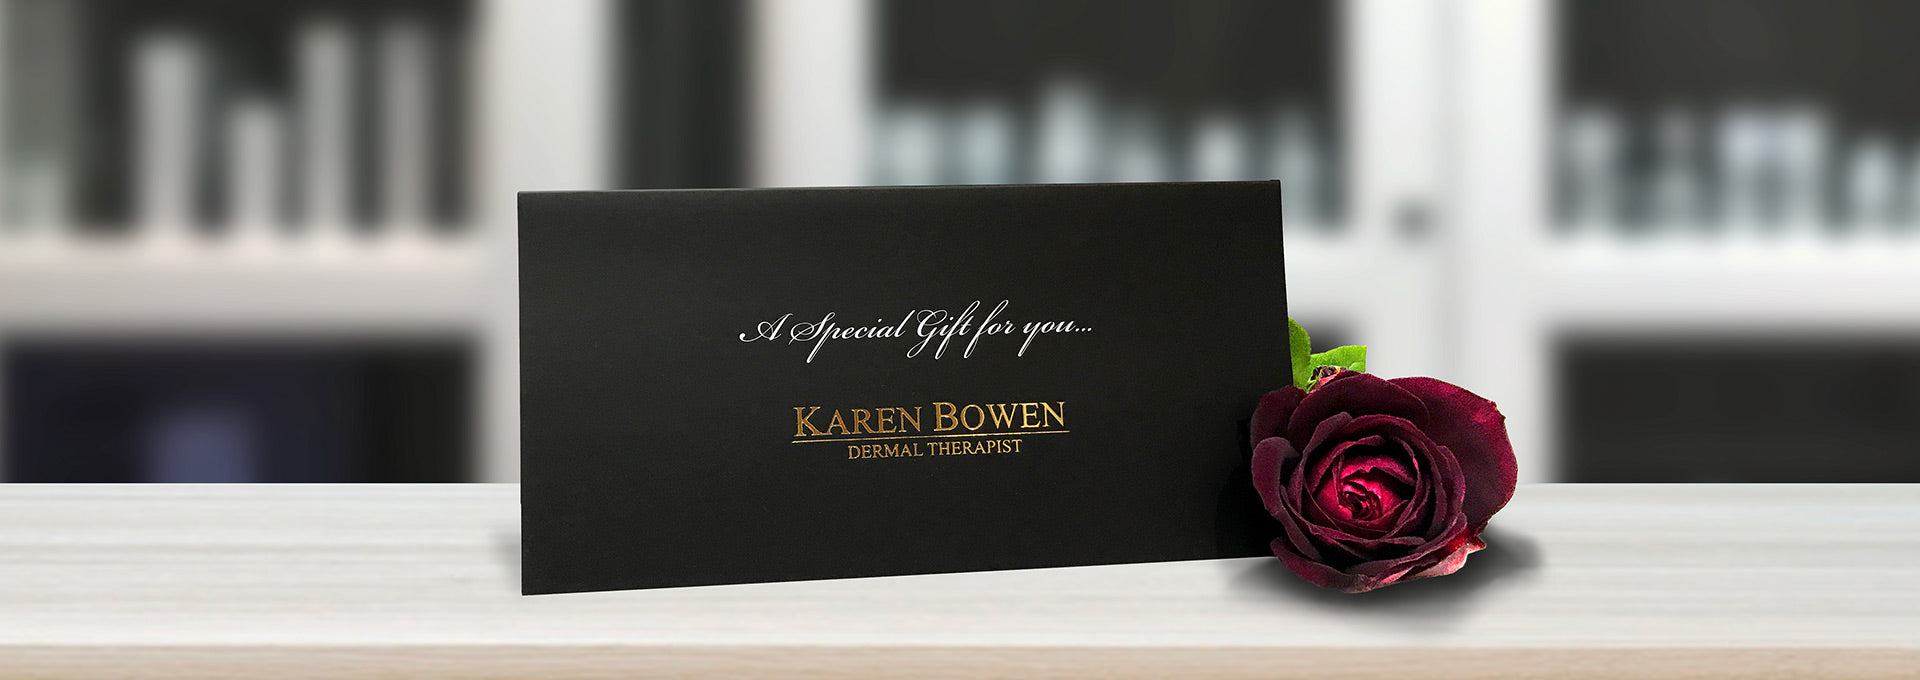 Gift Card for a Loved One - Karen Bowen Skin Care Clinic Perth